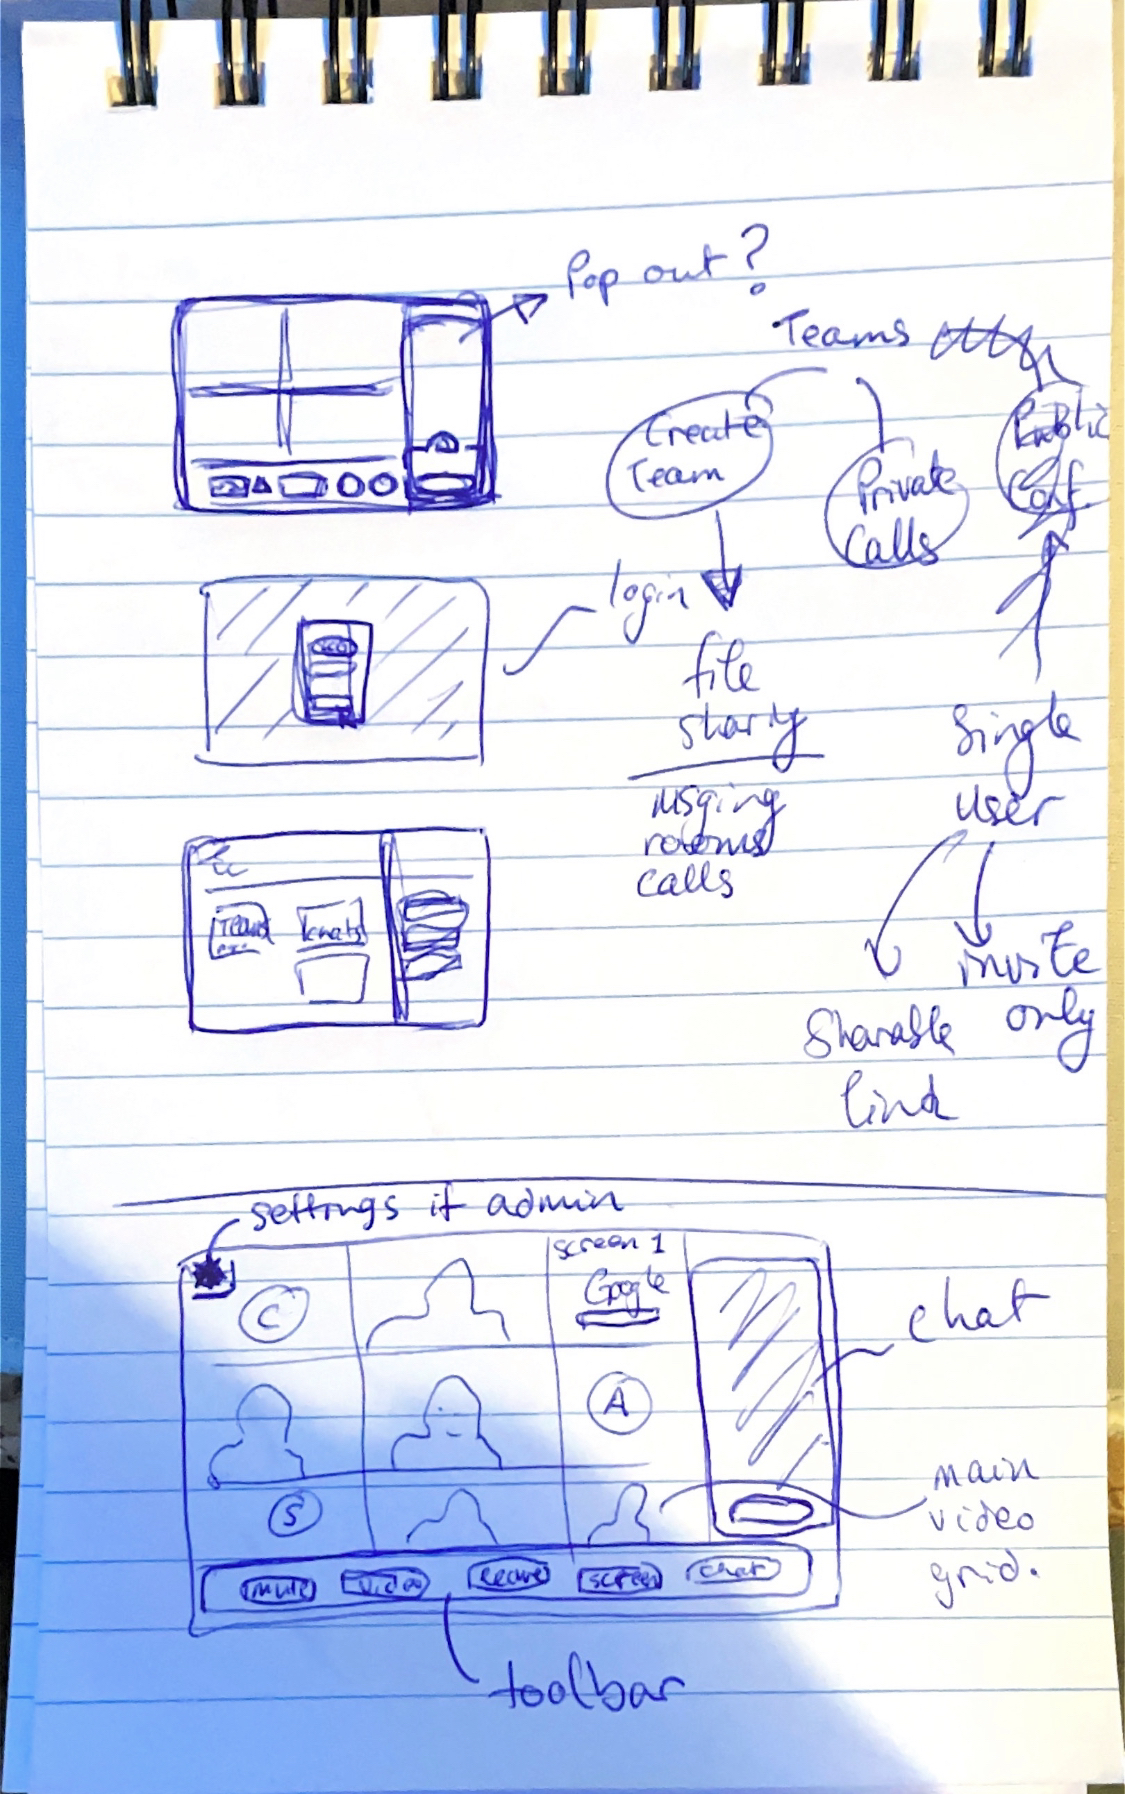 Sketch of Preliminary Call GUI Layout